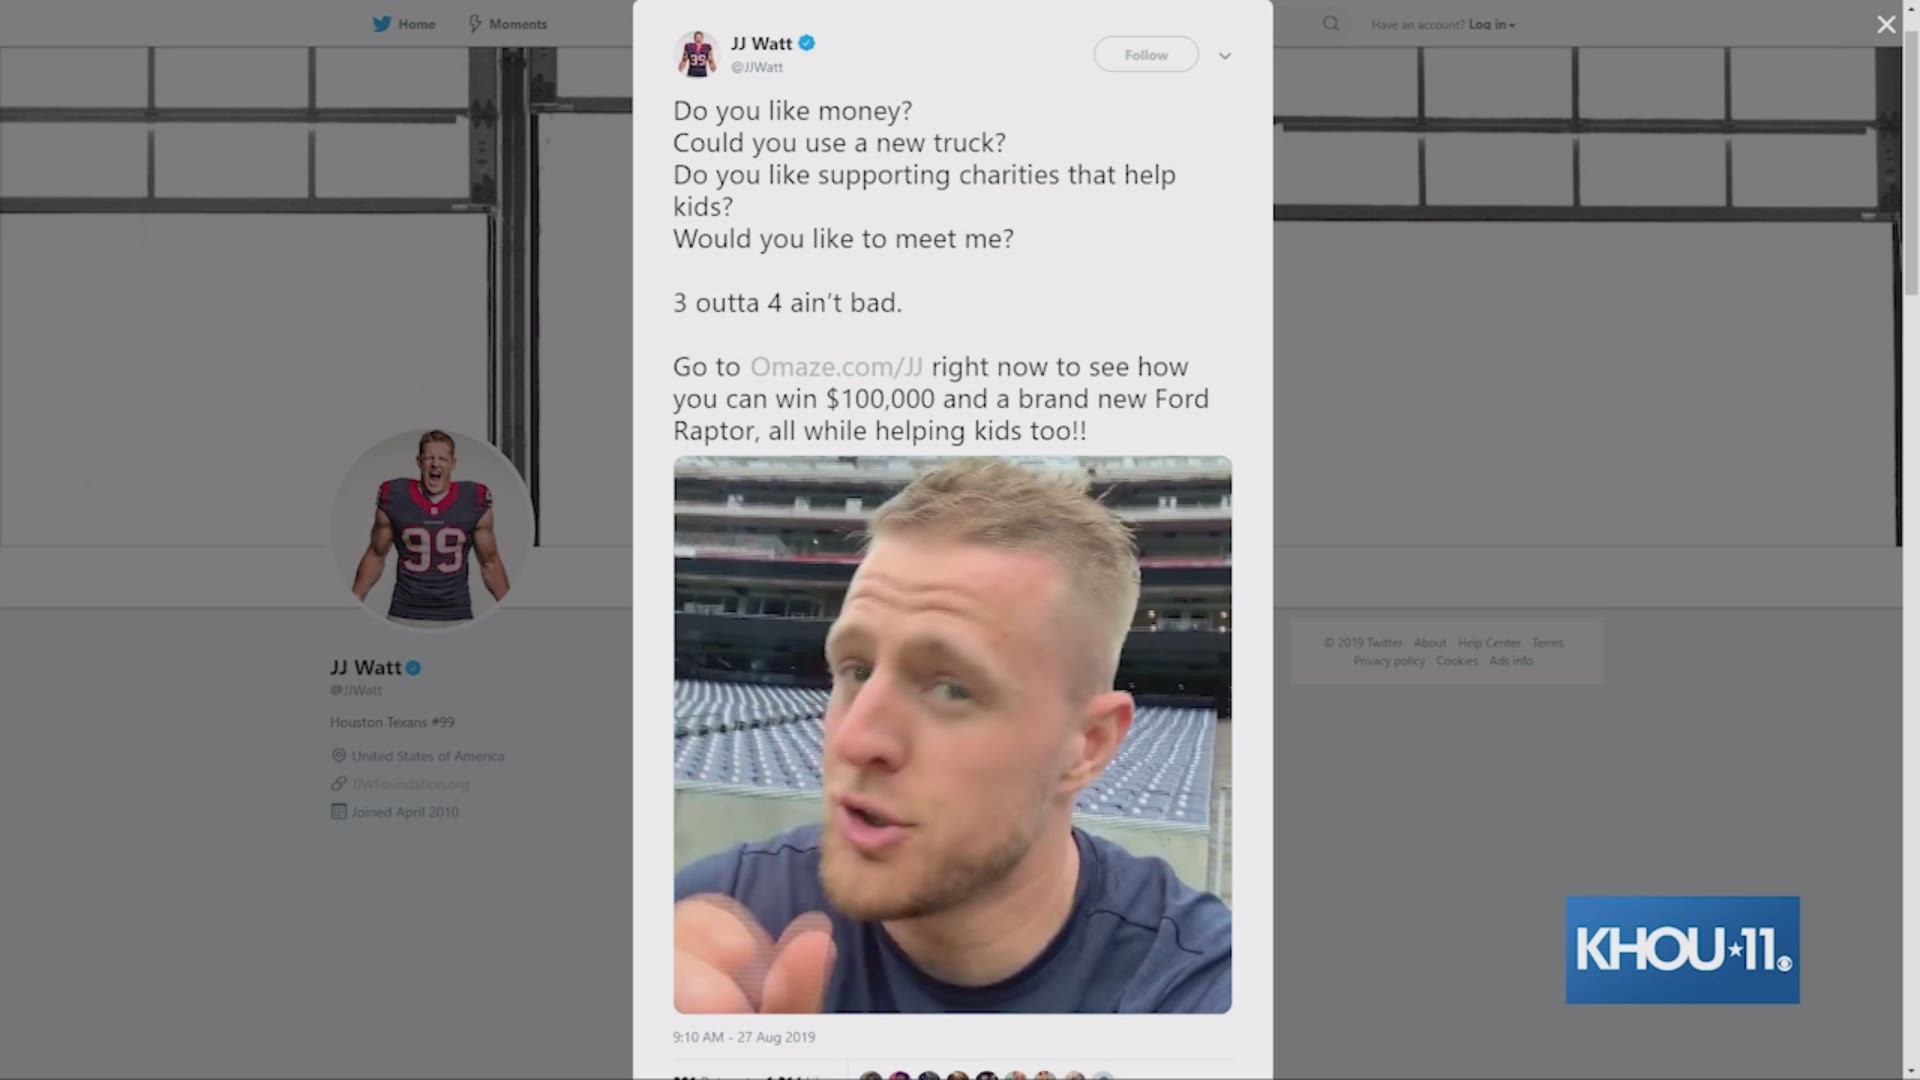 J.J. Watt is at it again. This time the Houston Texans star is giving away a chance to win $100,000 and a brand-new Ford Raptor, all while helping children.